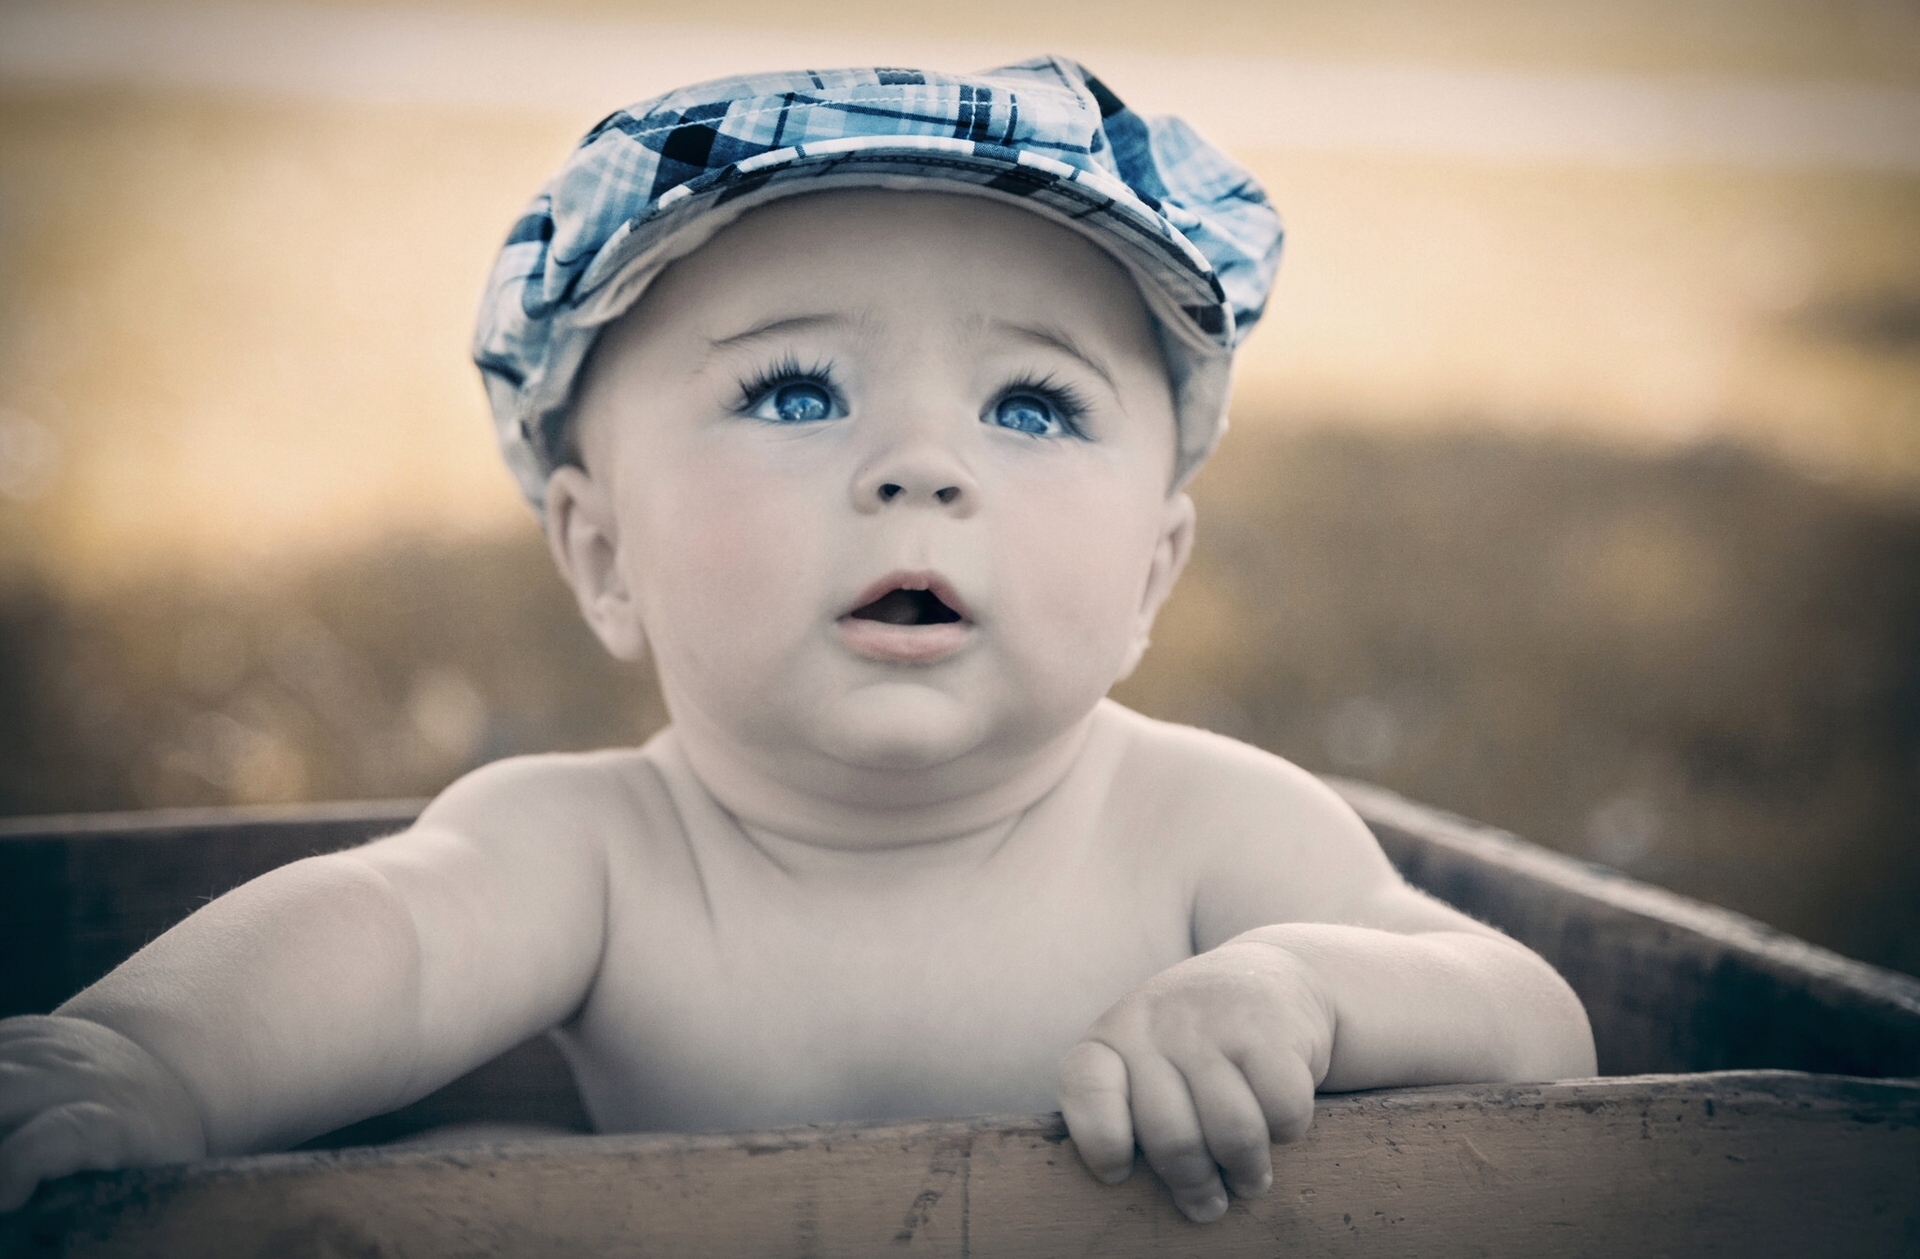 Download wallpaper boy, baby, cap, blue eyes, section mood in resolution 19...